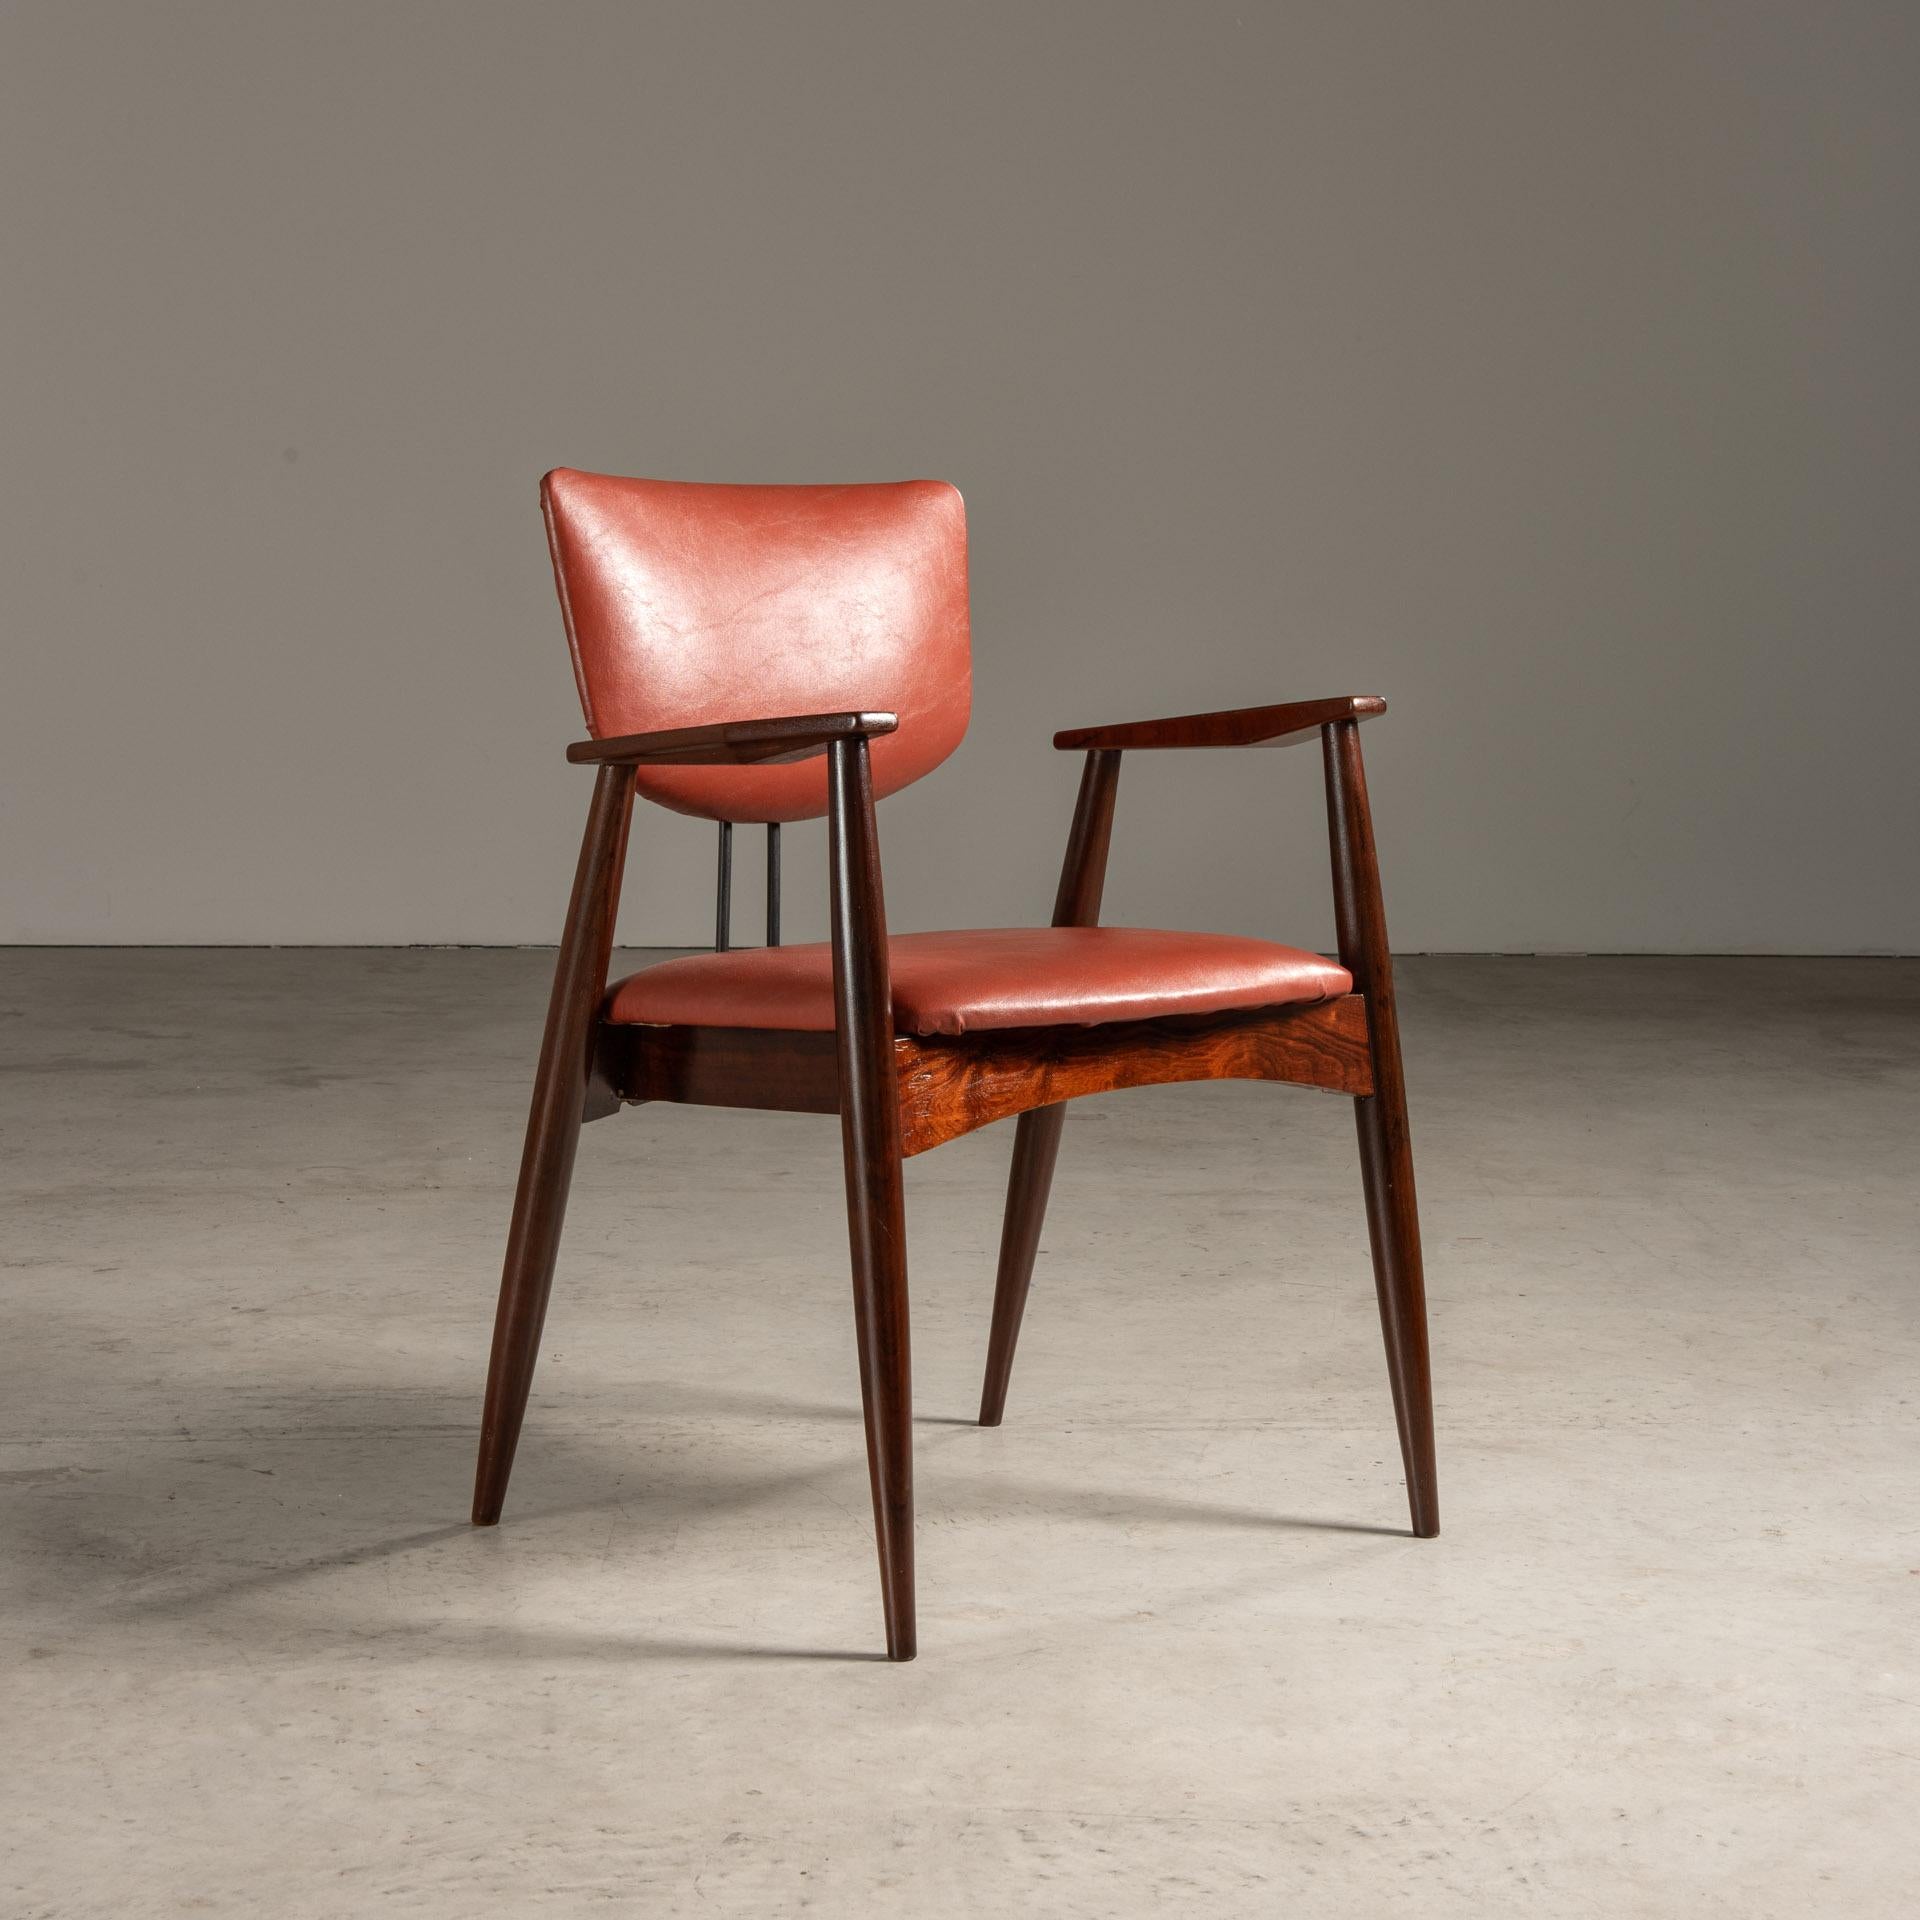 The chair designed by Michel Arnoult, a pivotal figure in the mid-20th-century Brazilian furniture movement, reflects the designer's commitment to practical, well-crafted, and accessible design. Arnoult was known for his pioneering work in flat-pack